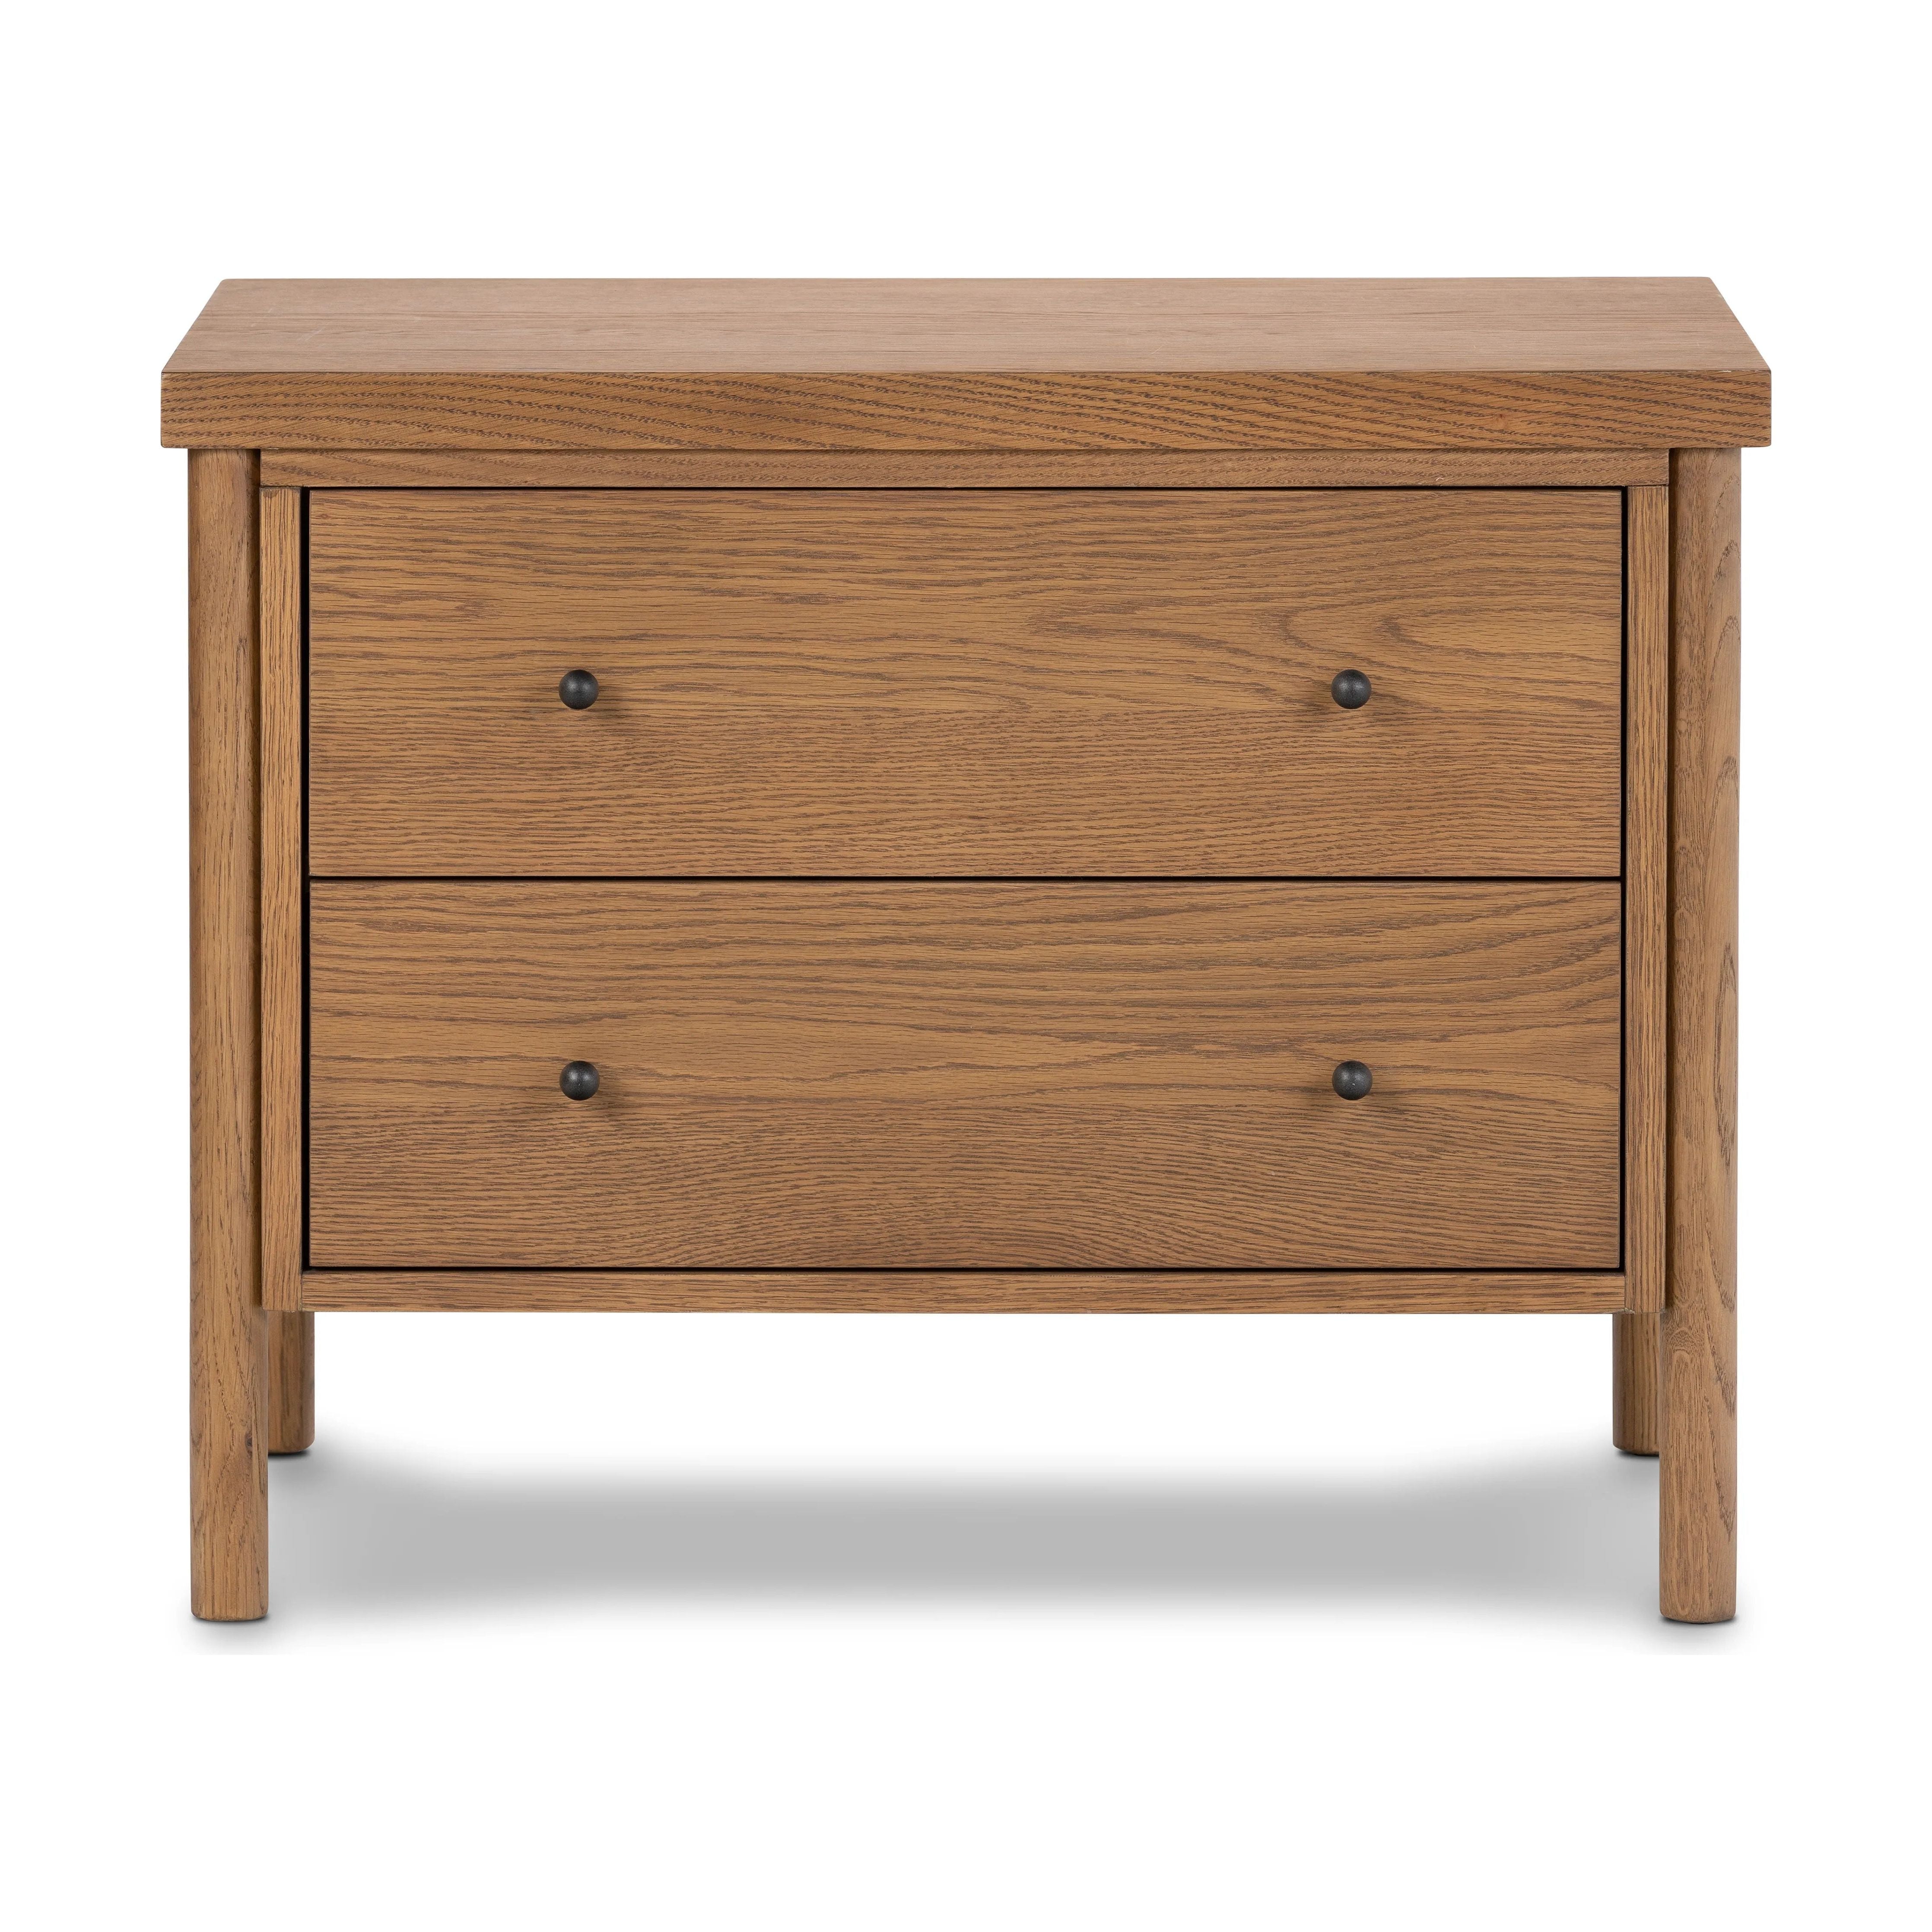 Rounded, chunky dowel legs in an amber oak finish support the overhang top of of this nightstand. Two drawers provide ample storage, finished with simple gunmetal hardware Amethyst Home provides interior design, new home construction design consulting, vintage area rugs, and lighting in the Houston metro area.